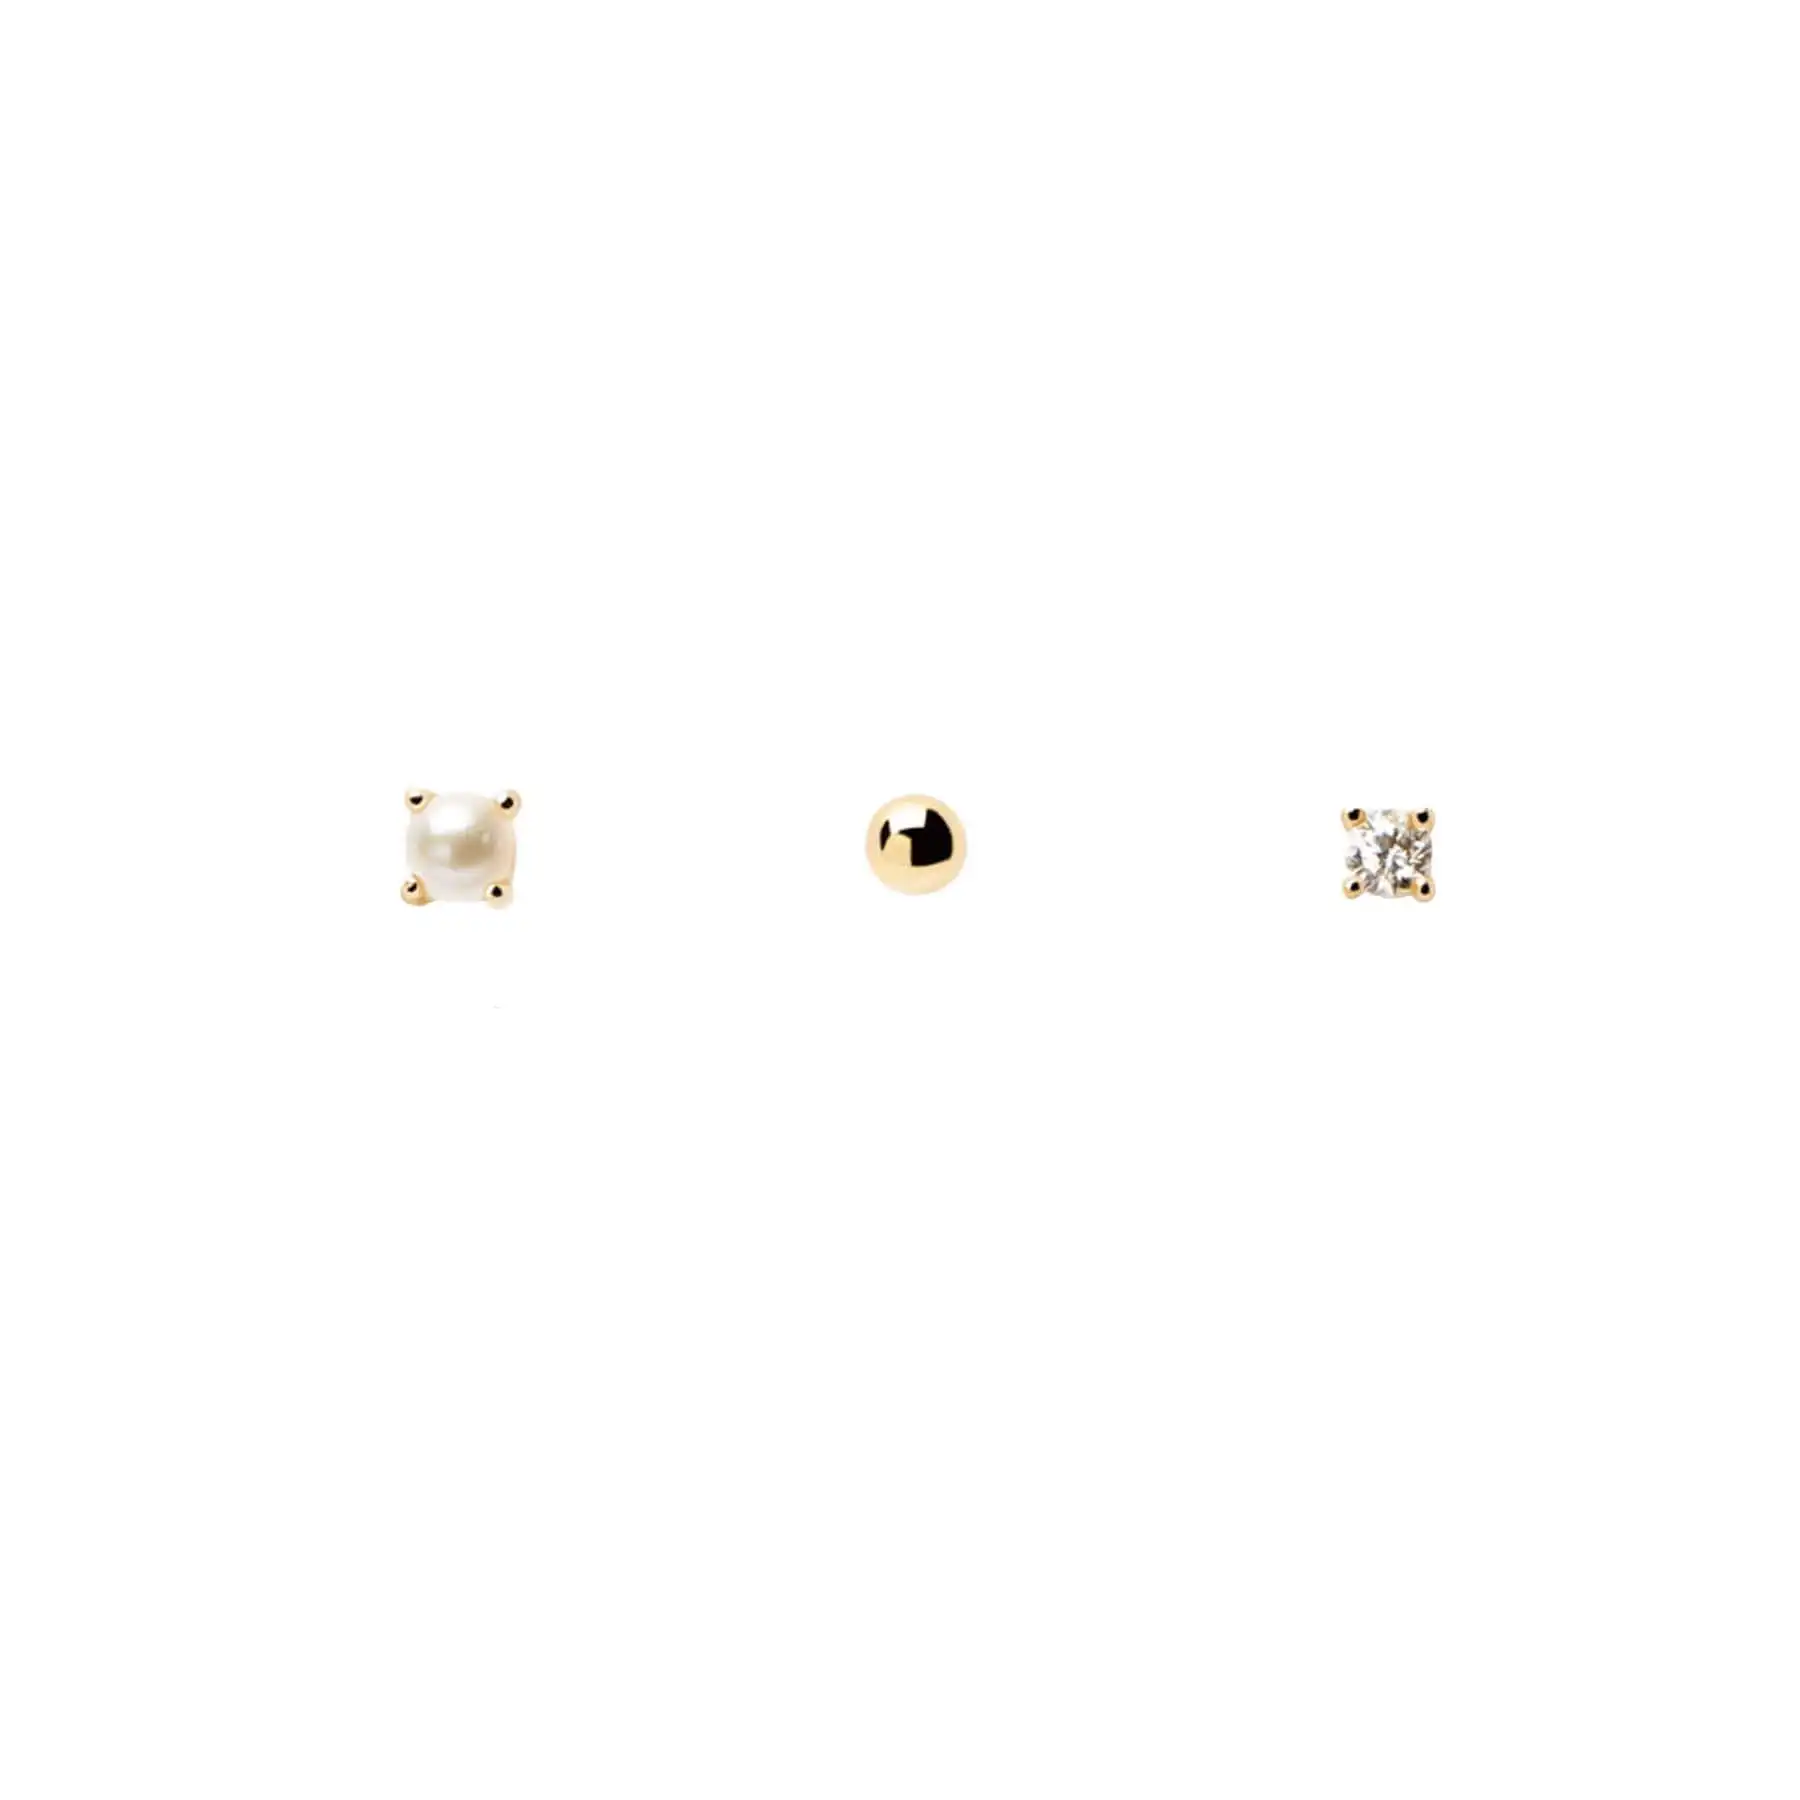 Tiny gold plated stud earrings set wholesale sterling silver 925 jewellery